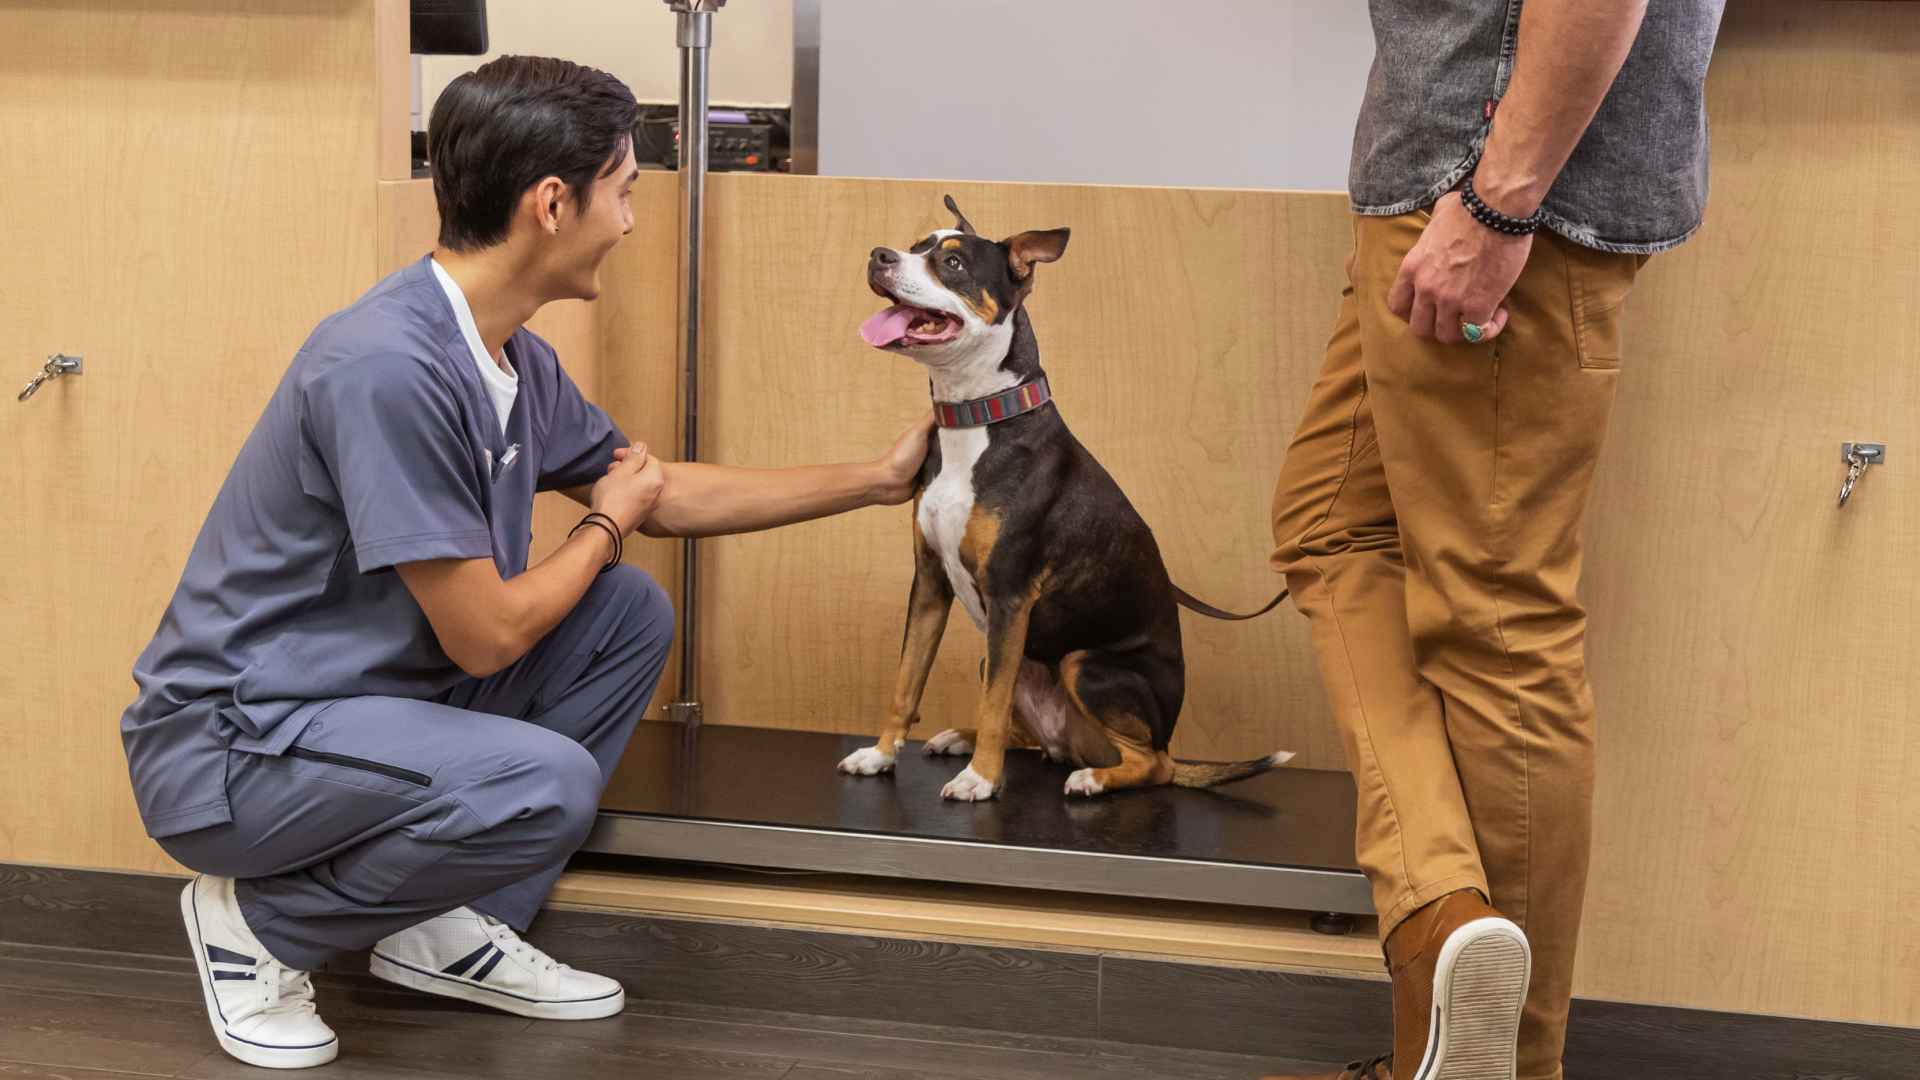 A young male veterinarian squatting and petting a dog while the owner of the dog stands next to him at the Banfield Pet Hospital